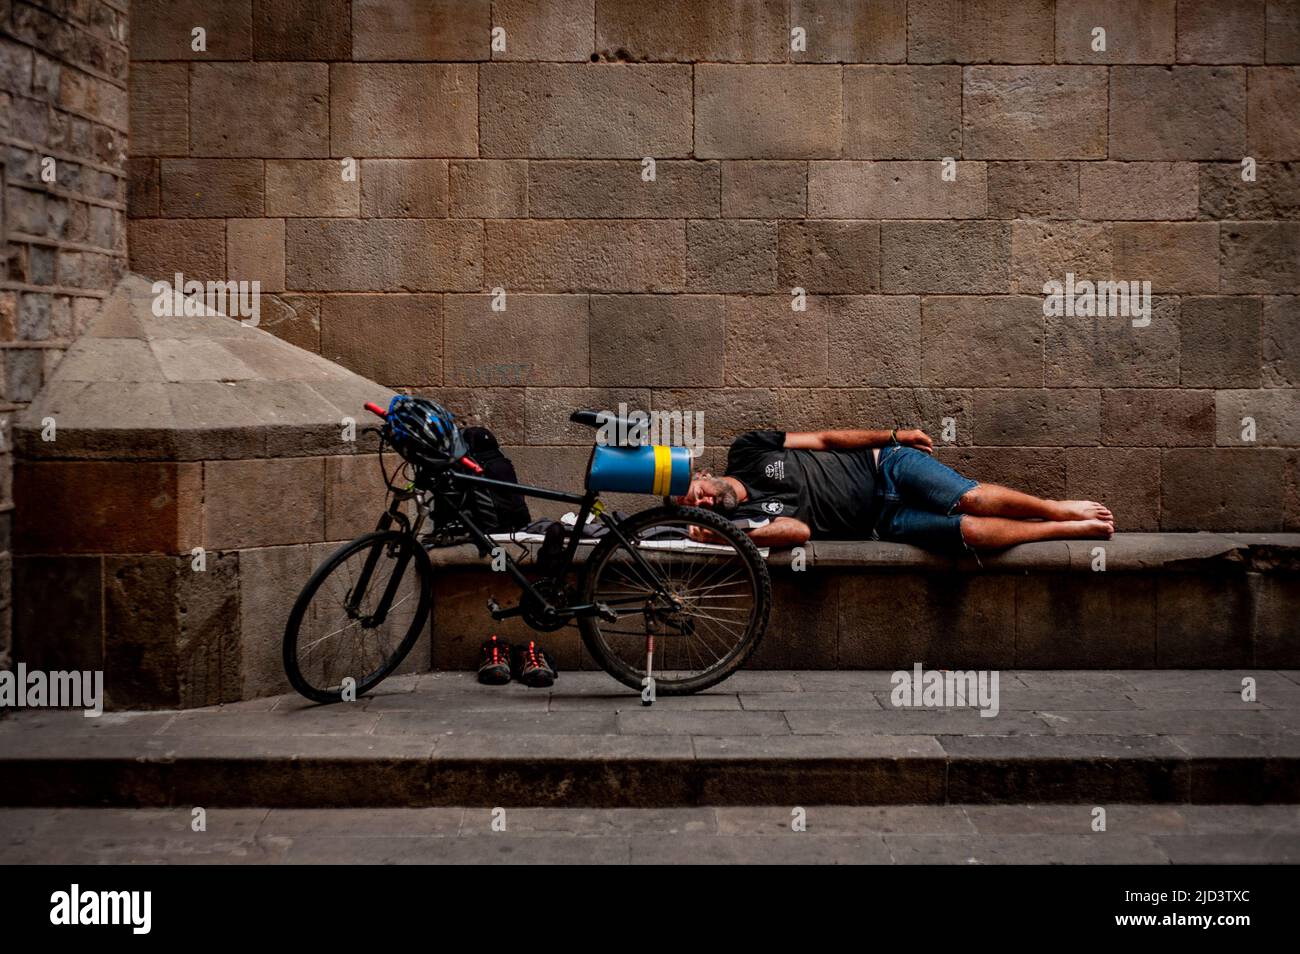 Barcelona, Spain. 17th June, 2022. June 17, 2022, Barcelona, Spain: A man sleeps in the Gothic Quarter of Barcelona as a heat wave is underway in parts of Western Europe, with widespread temperatures near or above 104 degrees Fahrenheit (40 Celsius) expected through the weekend. Current heatwave brings abnormally high temperatures for June days in Spain. Credit:  Jordi Boixareu/Alamy Live News Credit:  Jordi Boixareu/Alamy Live News Stock Photo